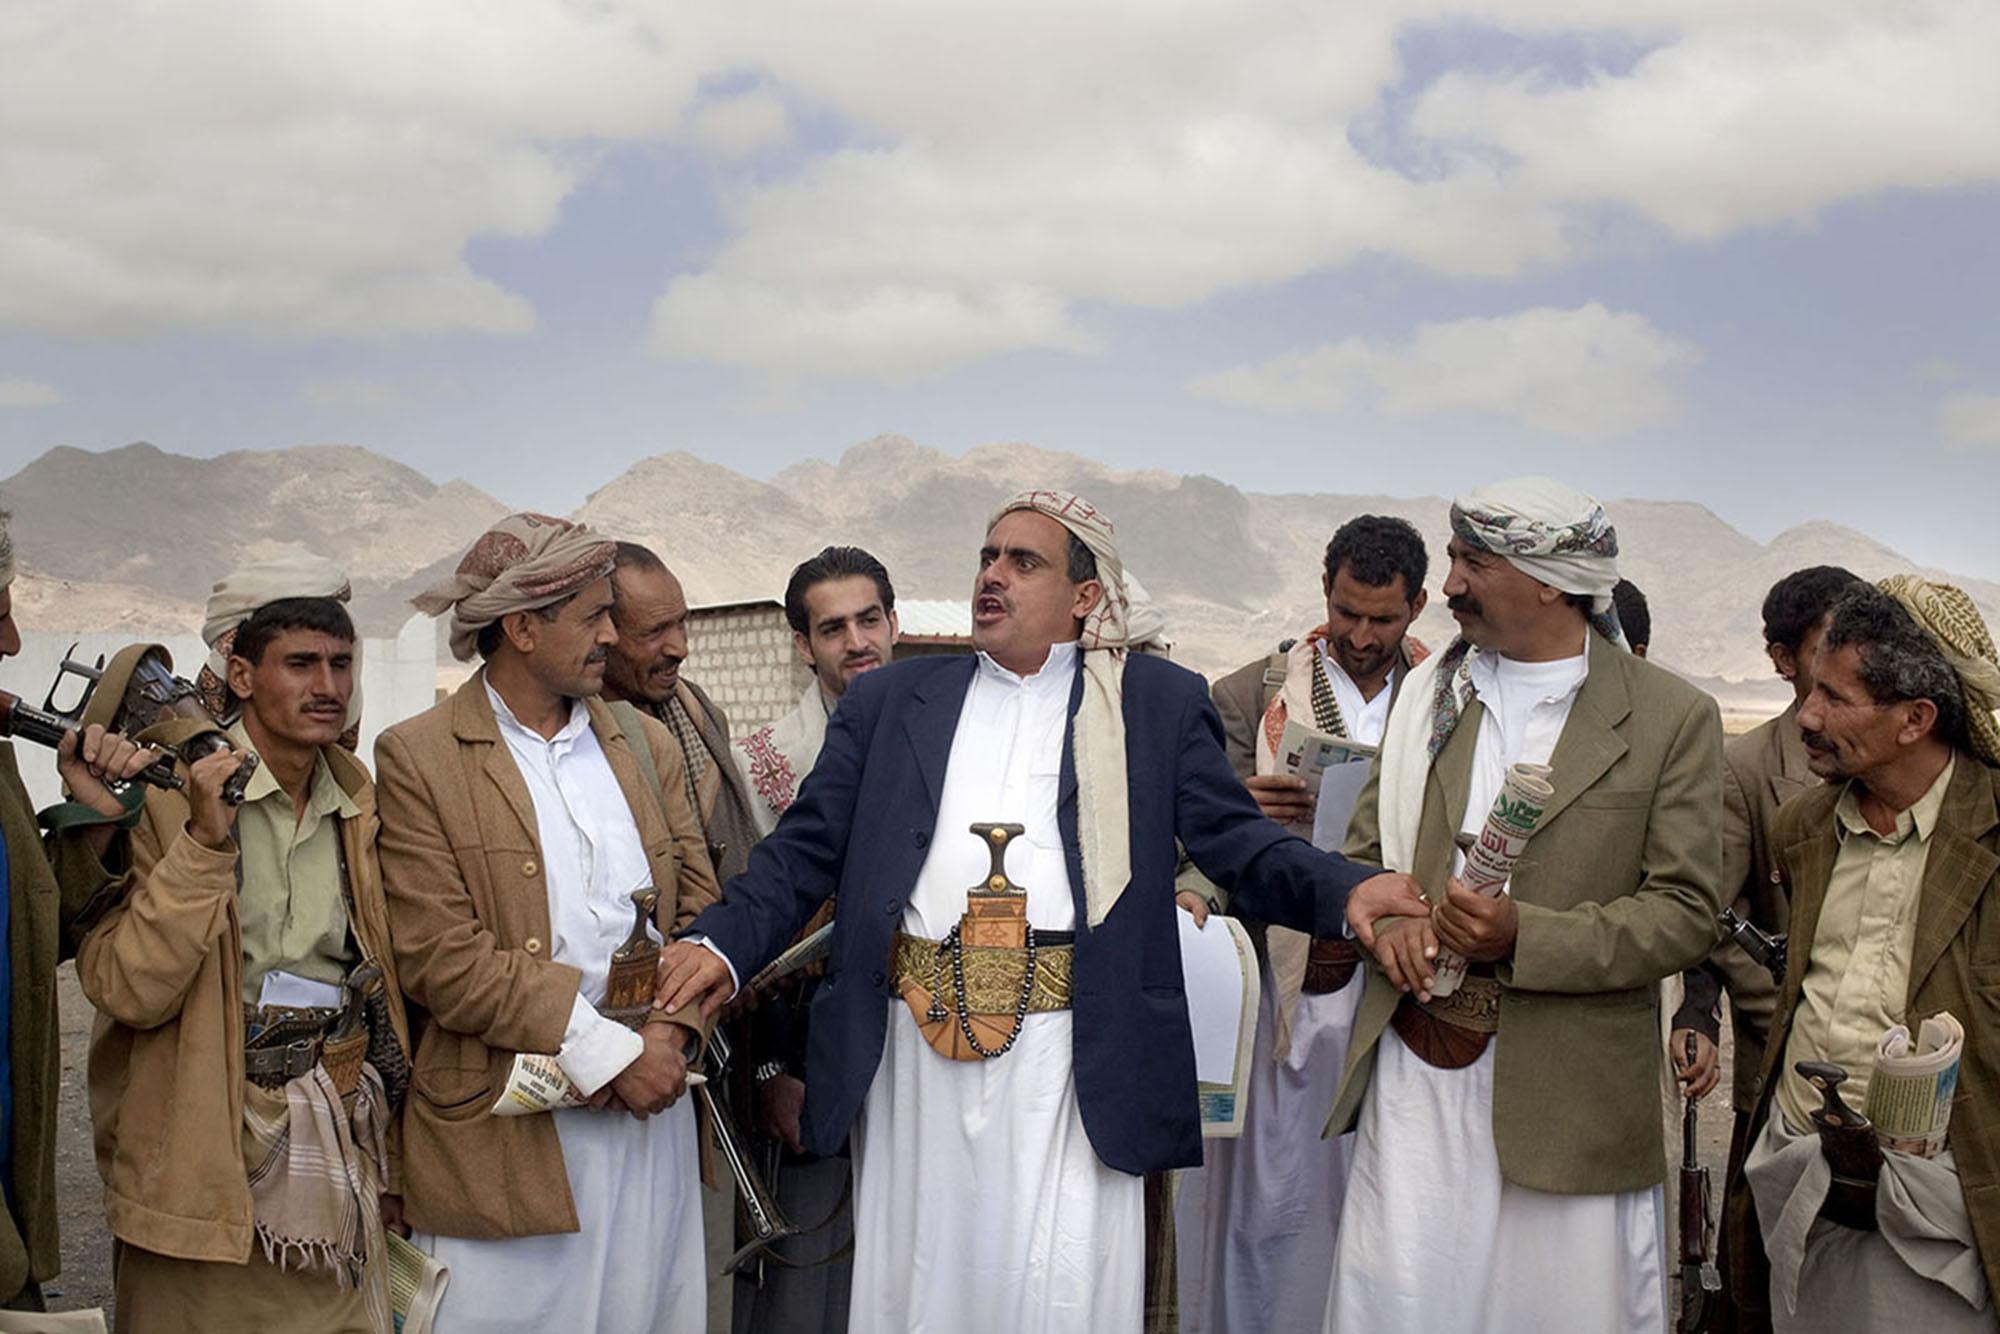 PORTFOLIO - Yemen is a tribal country. Decades of conflict divide the...